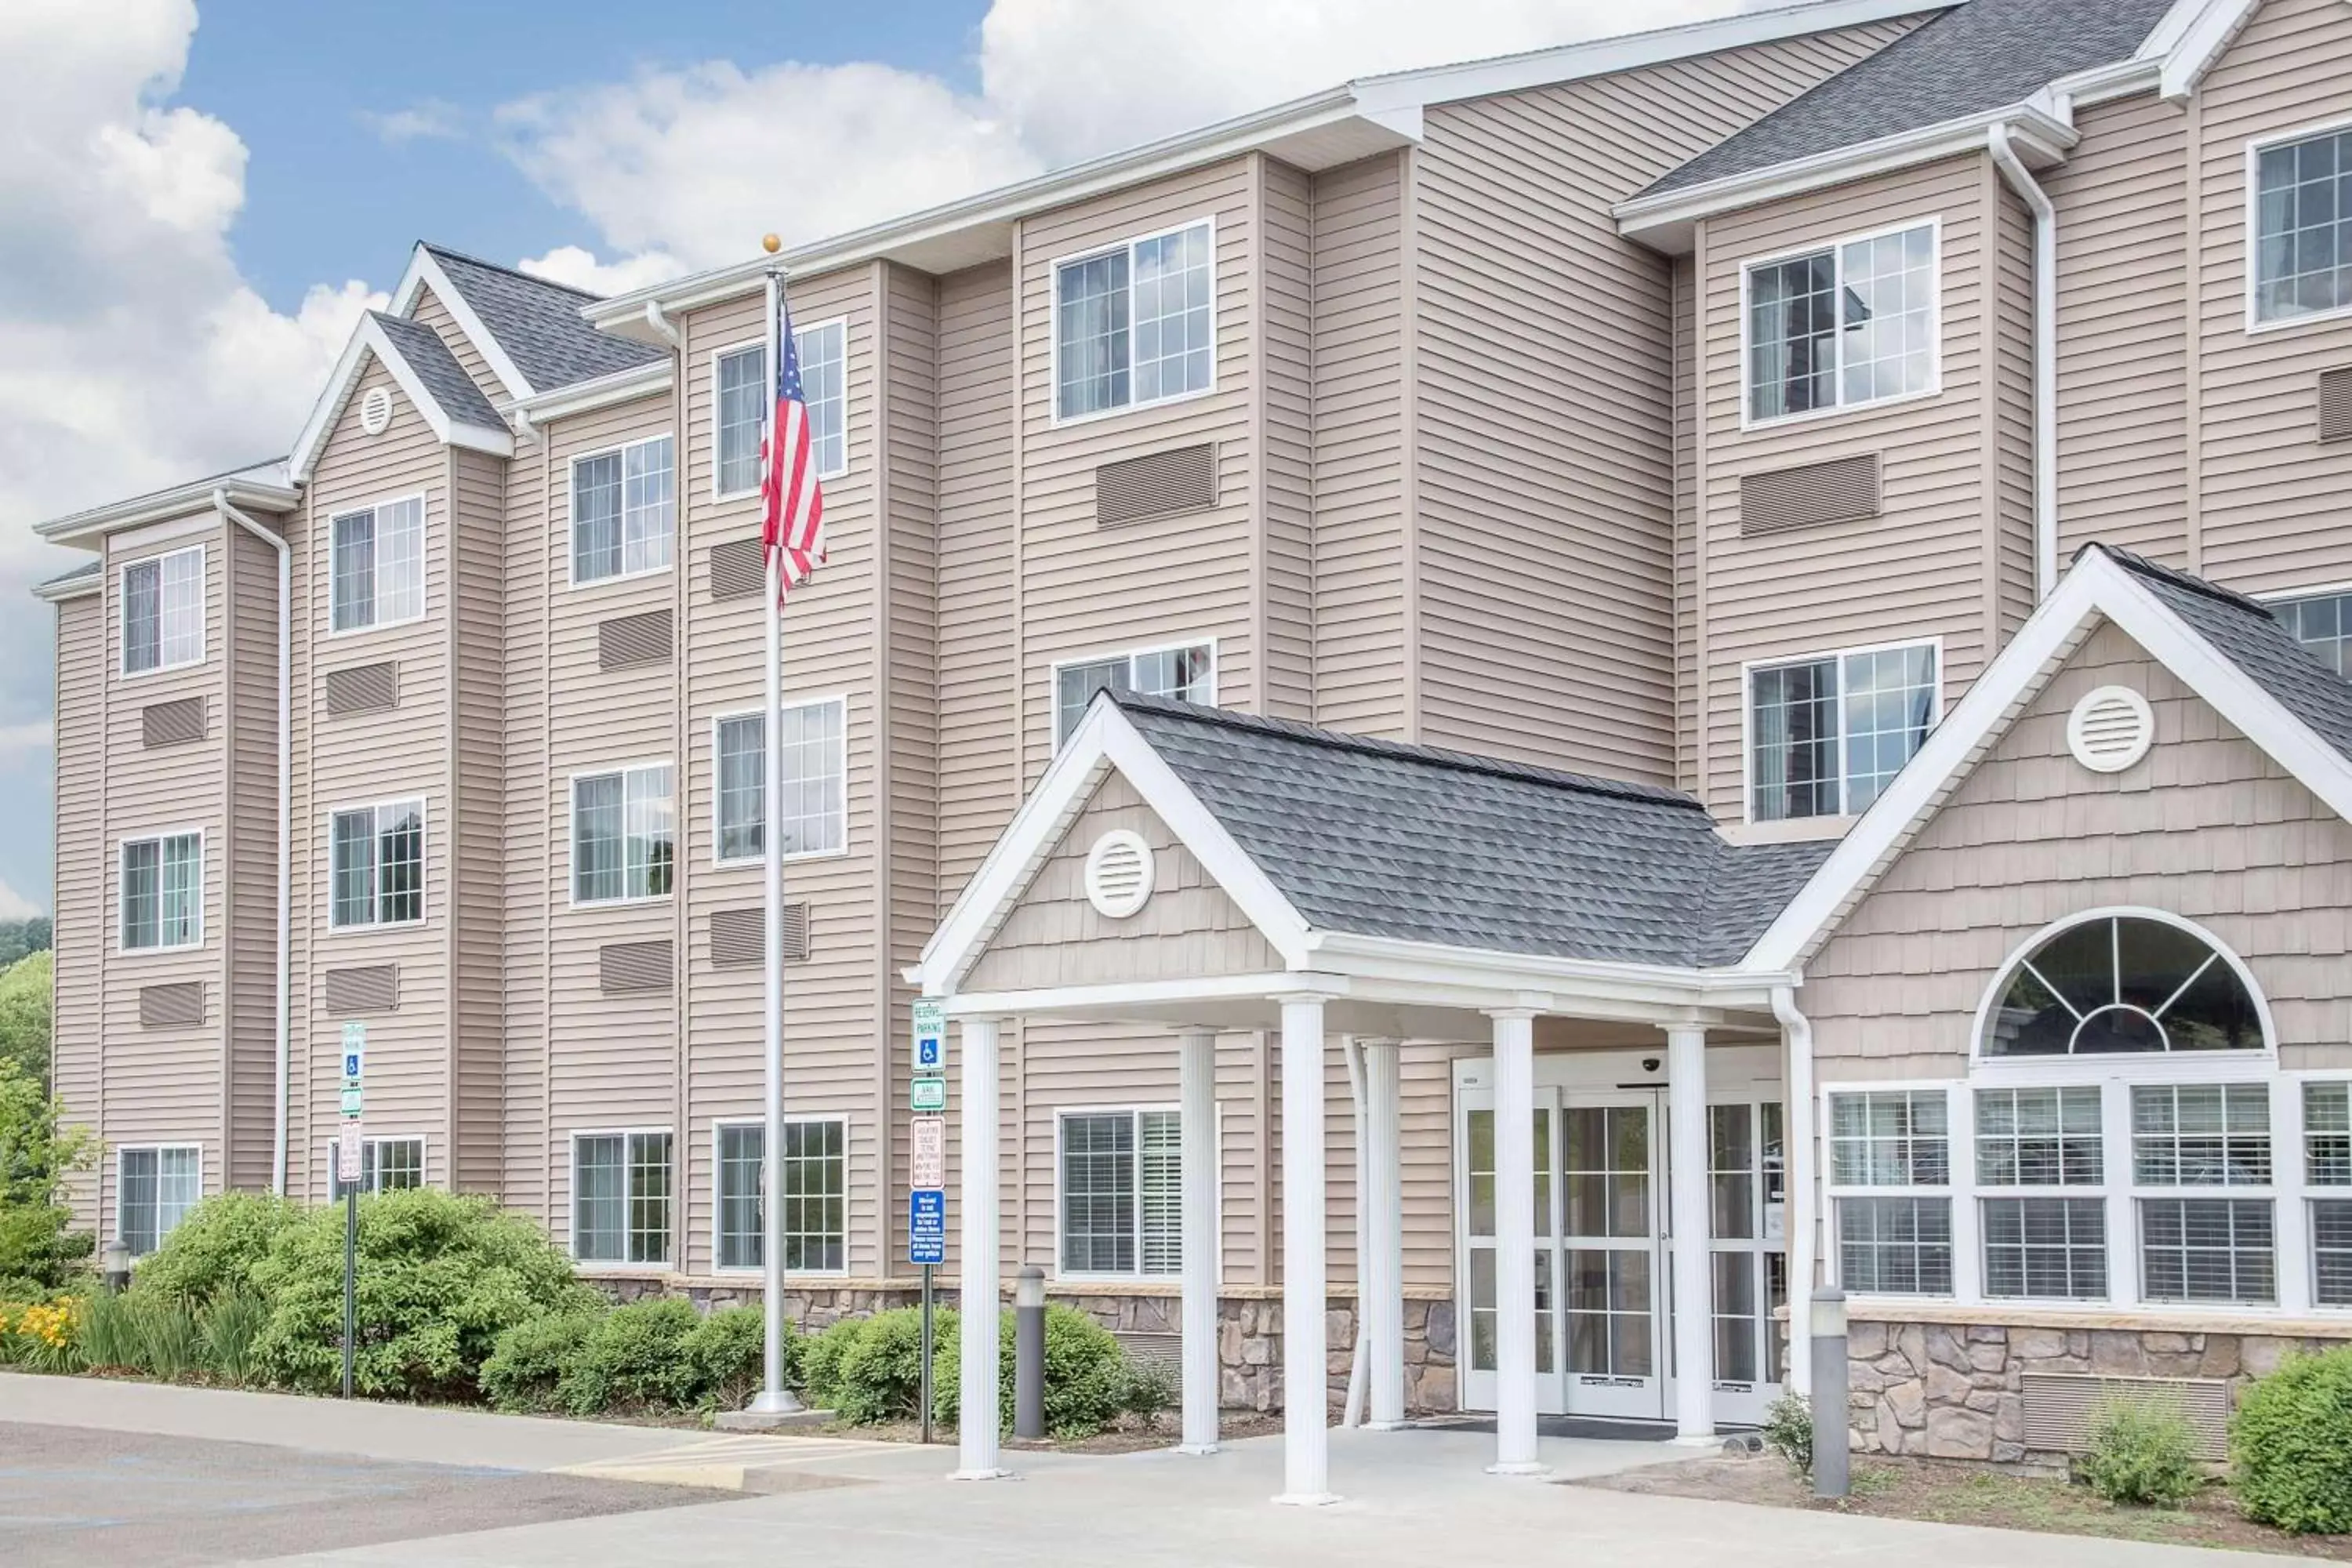 Property Building in Microtel Inn & Suites Mansfield PA